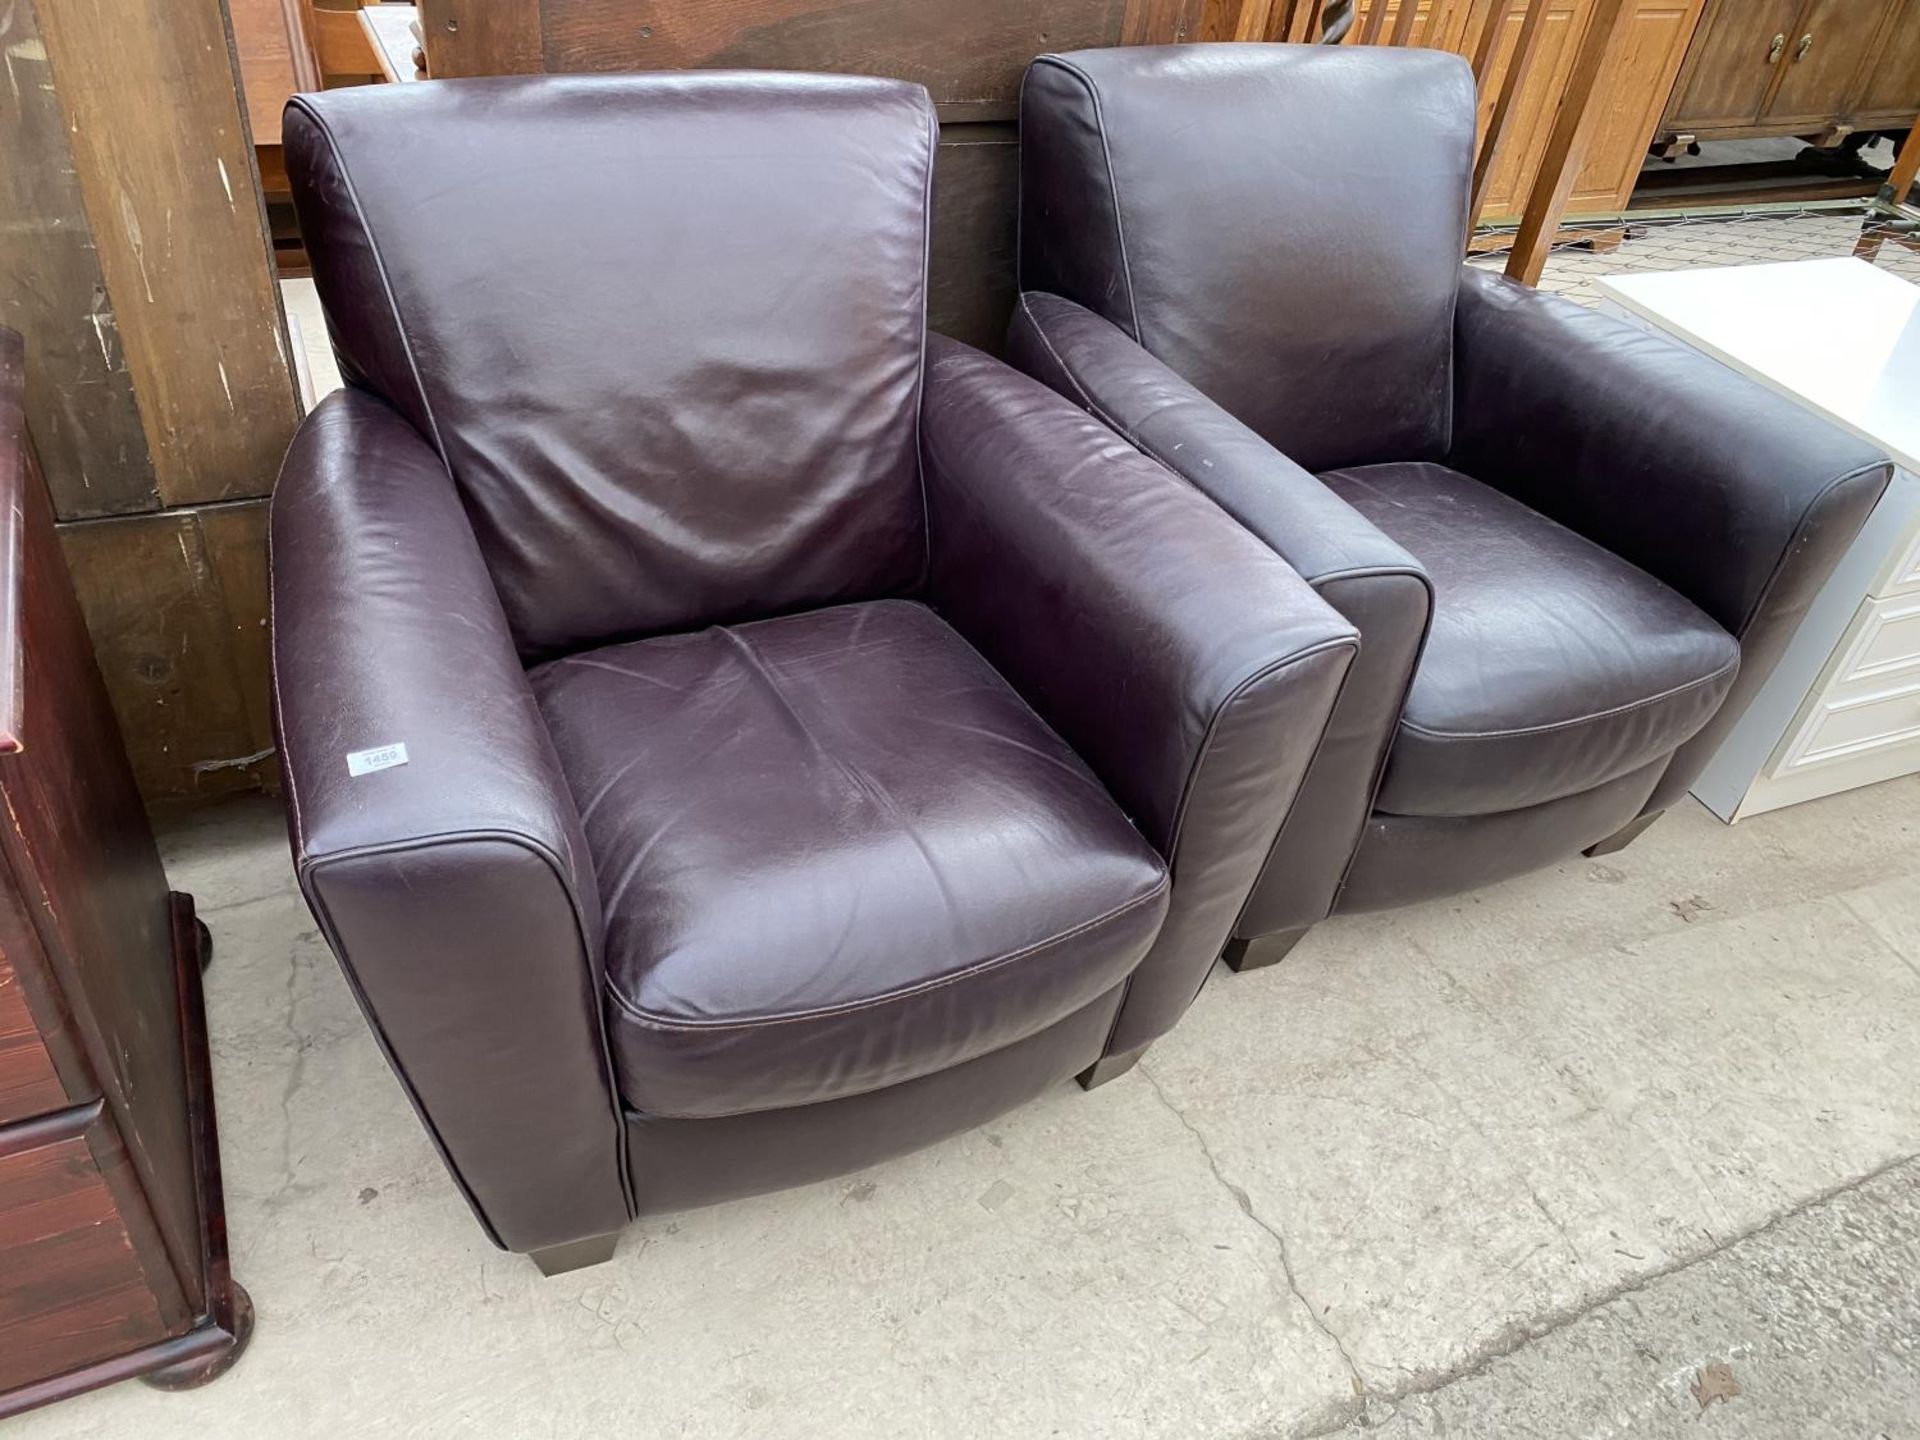 TWO LEATHER ARMCHAIRS